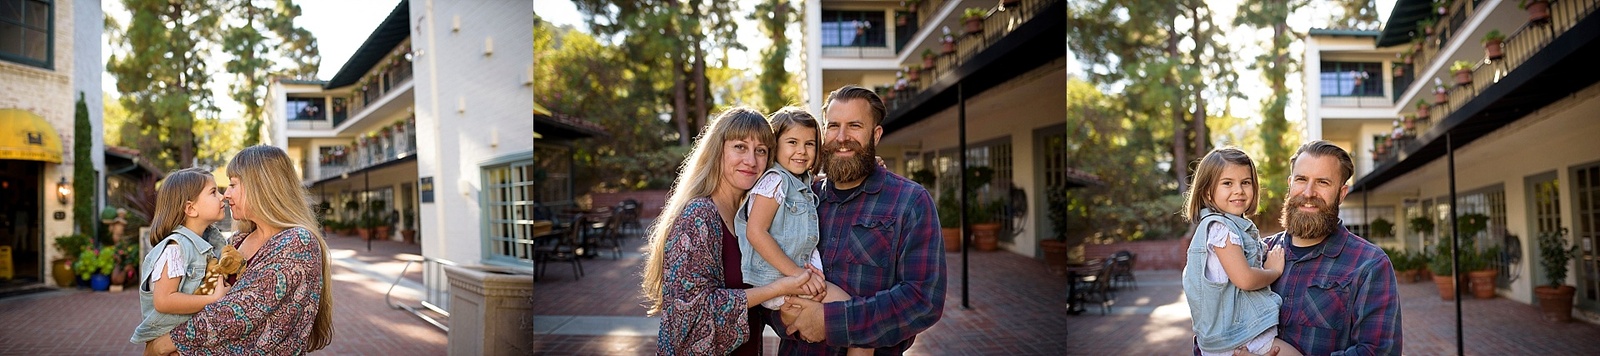 Cute family photos by yellow vase in Malaga Cove Plaza